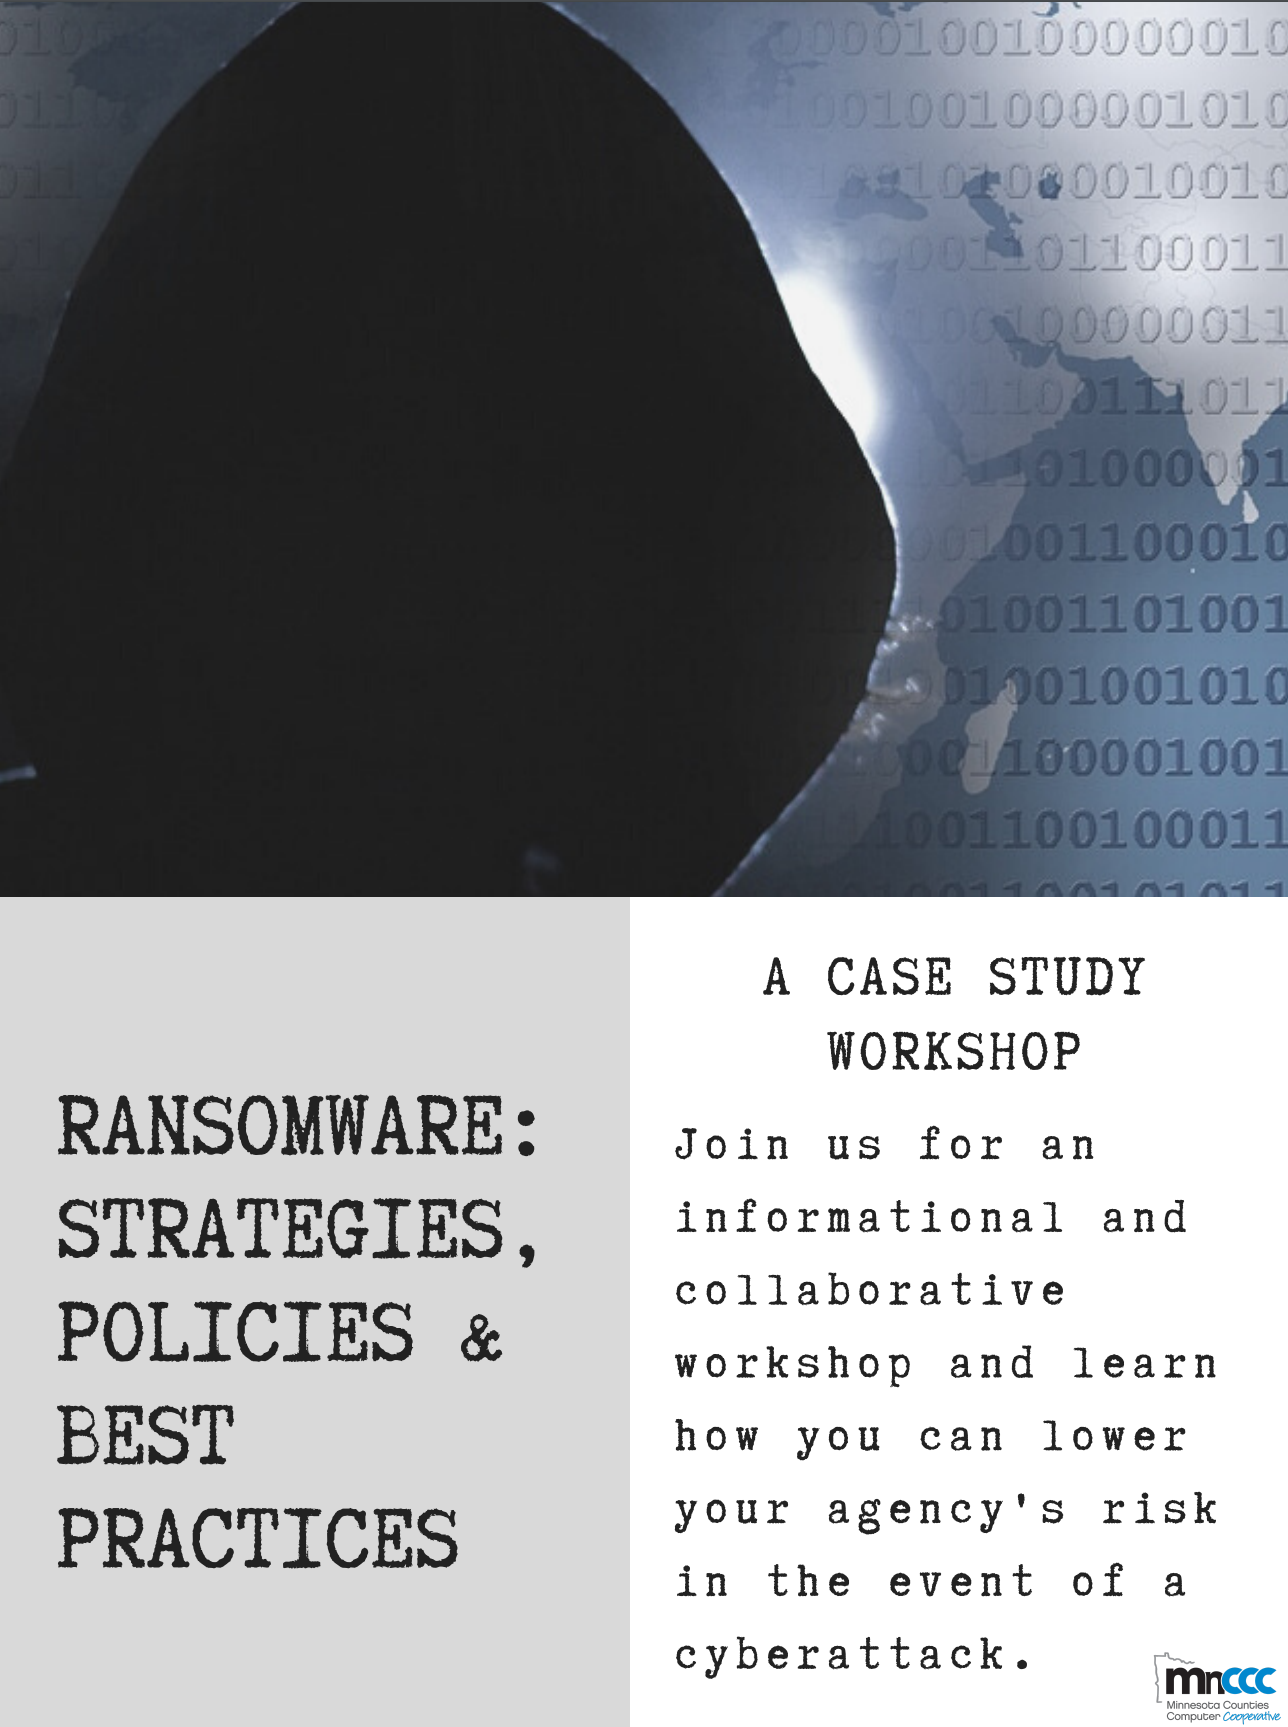 Ransomware: Strategies, Policies, and Best Practices - Join us for an informational and collaborative workshop and learn how you can lower your agency's risk in the event of a cyberattack.